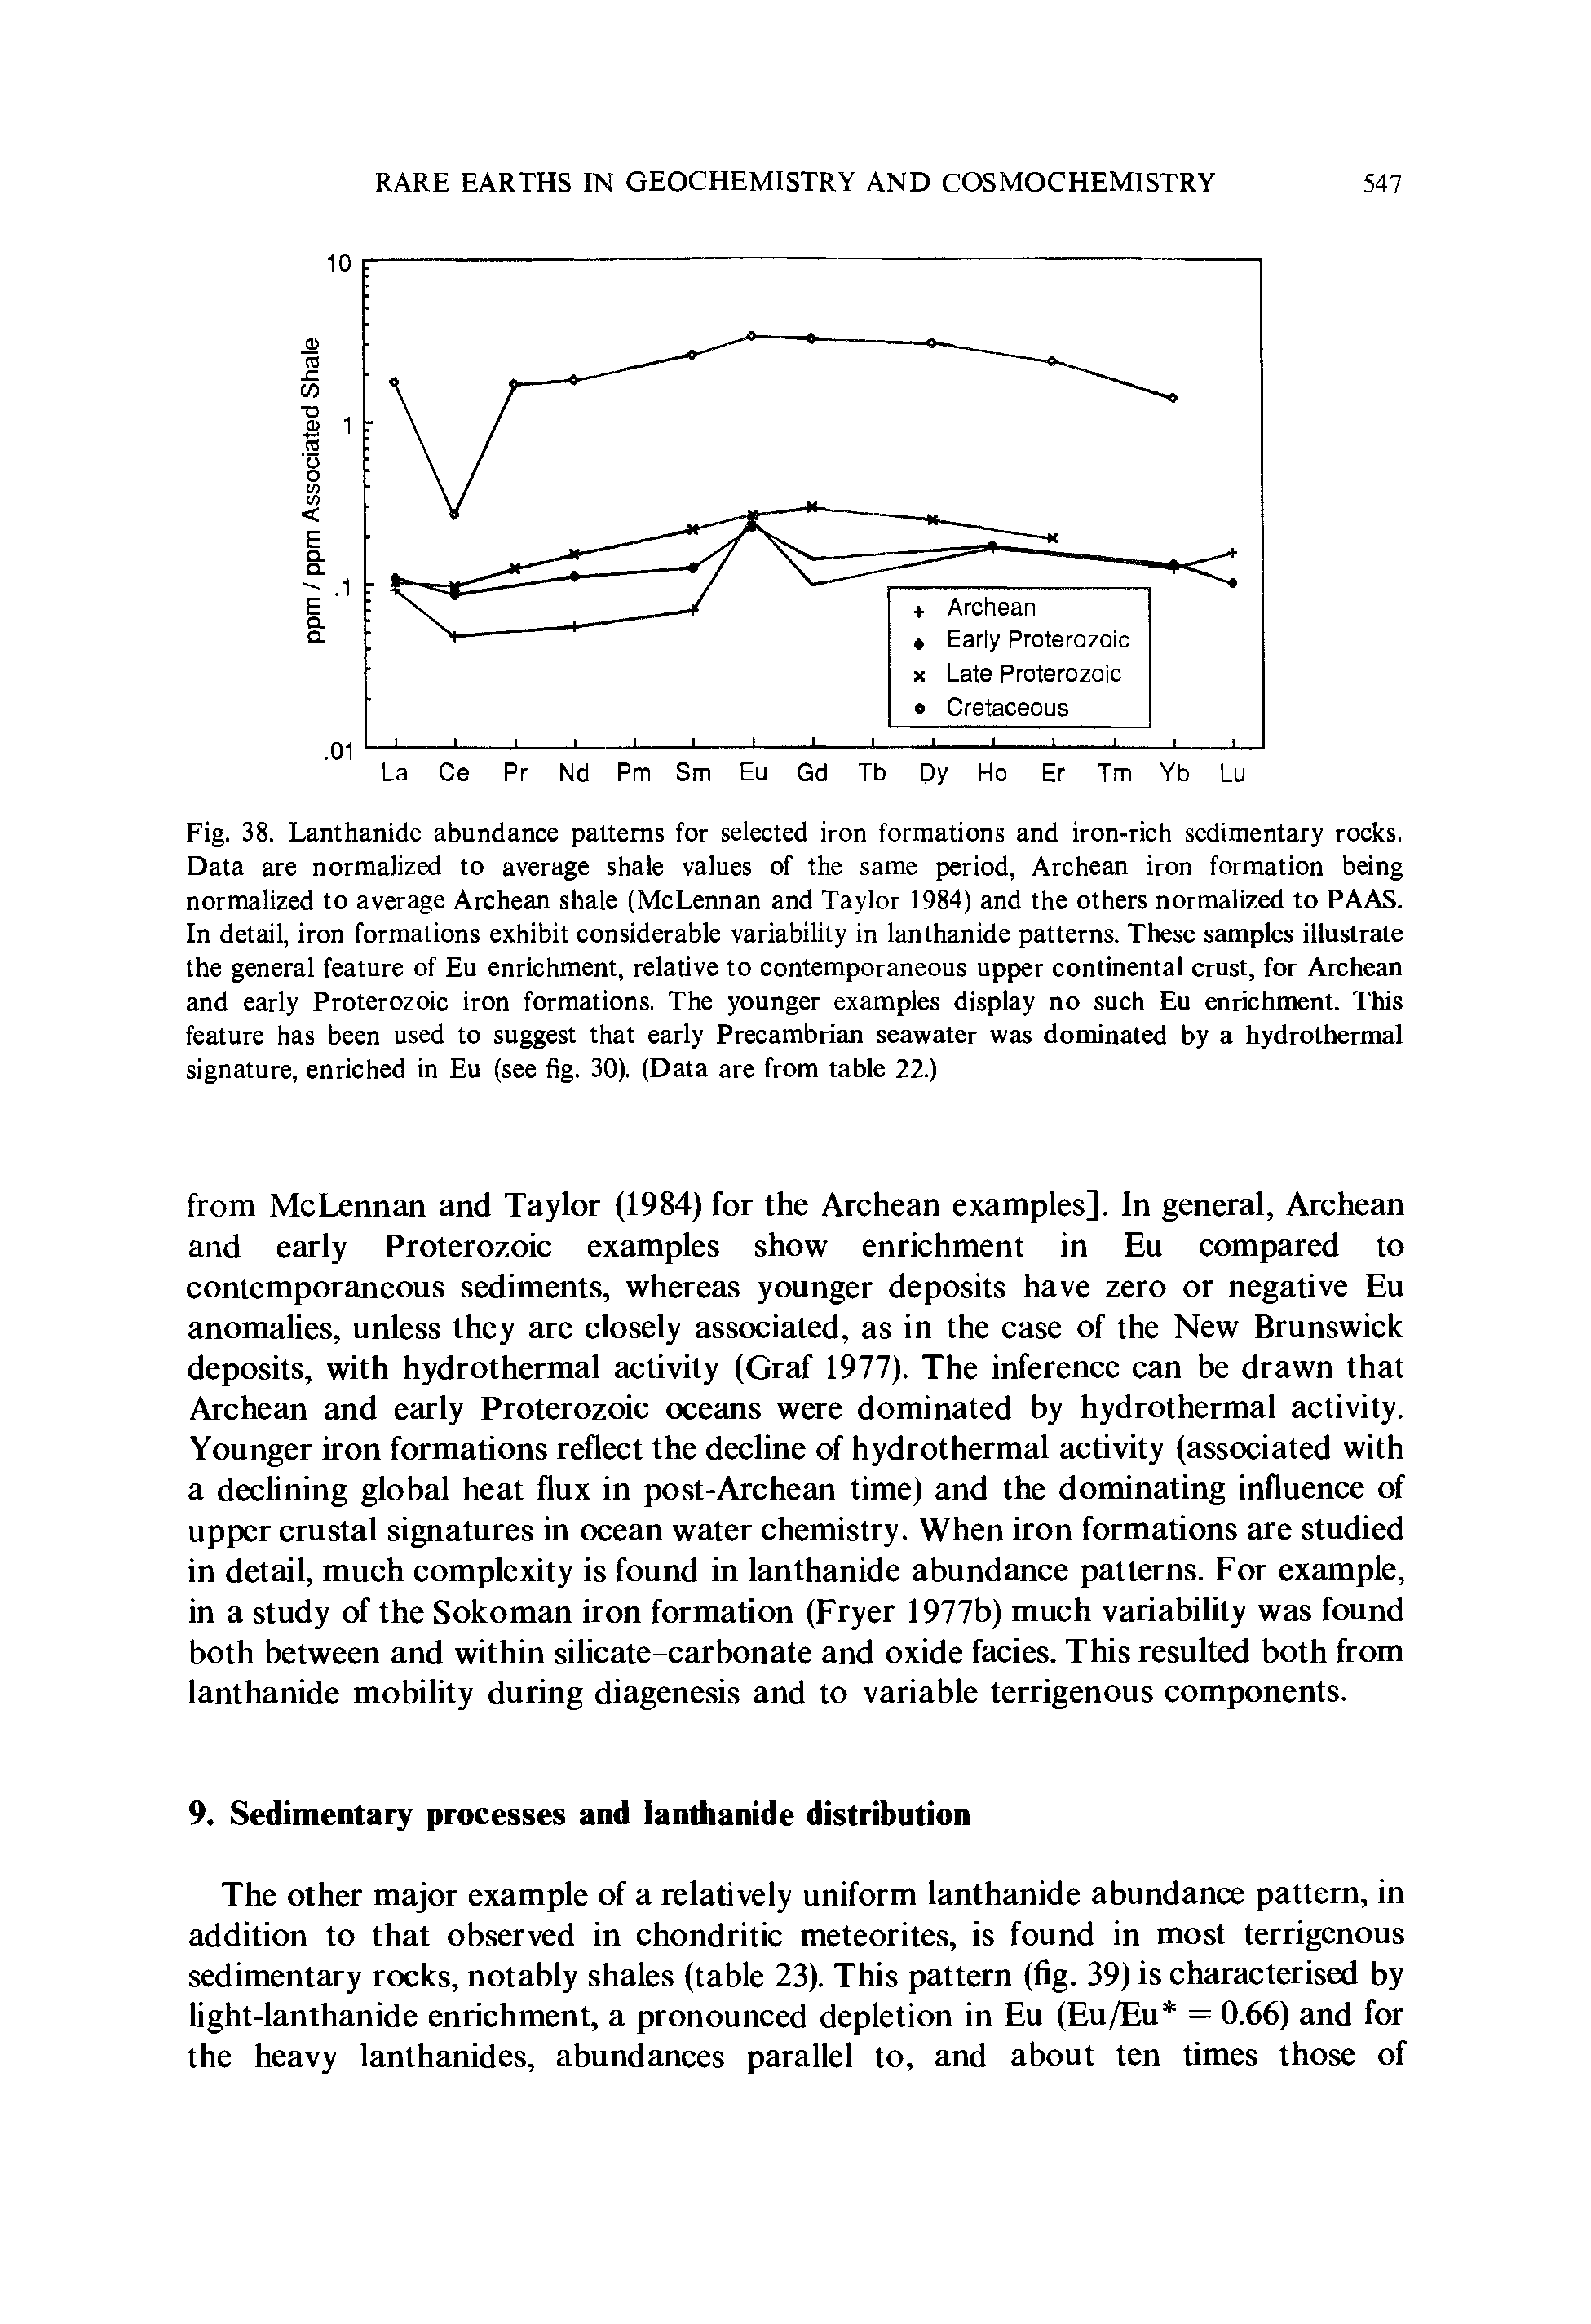 Fig. 38. Lanthanide abundance patterns for selected iron formations and iron-rich sedimentary rocks. Data are normalized to average shale values of the same period, Archean iron formation being normalized to average Archean shale (McLennan and Taylor 1984) and the others normalized to PAAS. In detail, iron formations exhibit considerable variability in lanthanide patterns. These samples illustrate the general feature of Eu enrichment, relative to contemporaneous upper continental crust, for Archean and early Proterozoic iron formations. The younger examples display no such Eu enrichment. This feature has been used to suggest that early Precambrian seawater was dominated by a hydrothermal signature, enriched in Eu (see fig. 30). (Data are from table 22.)...